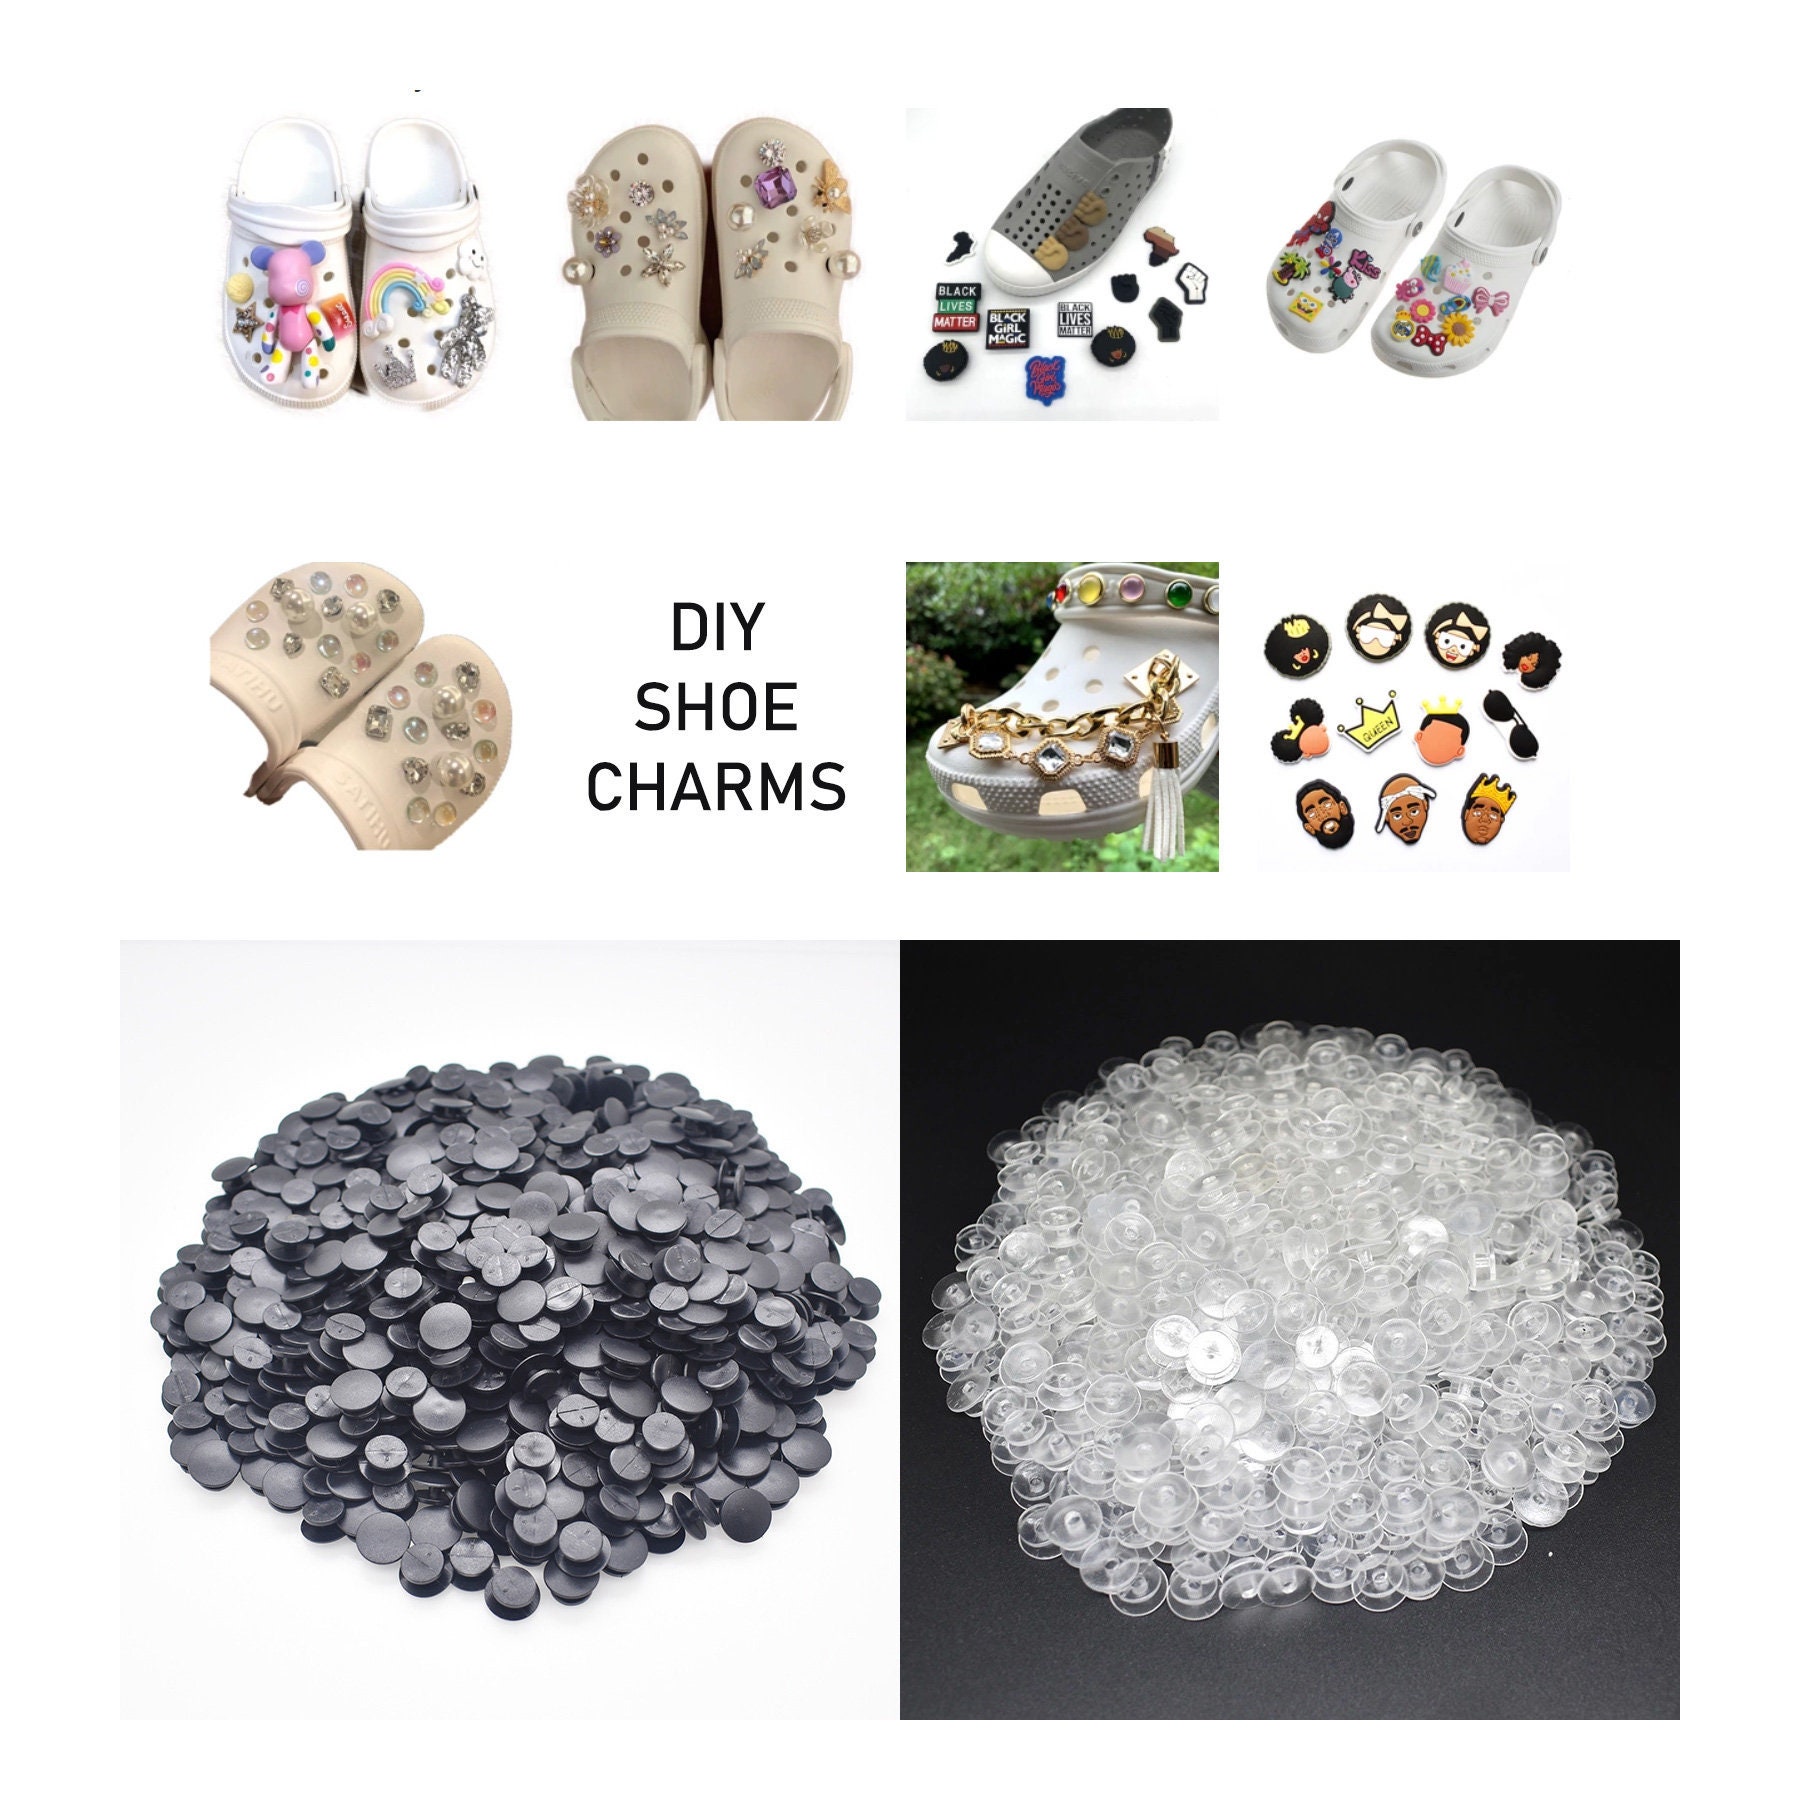 Back Buttons for Crocs Shoe Charms